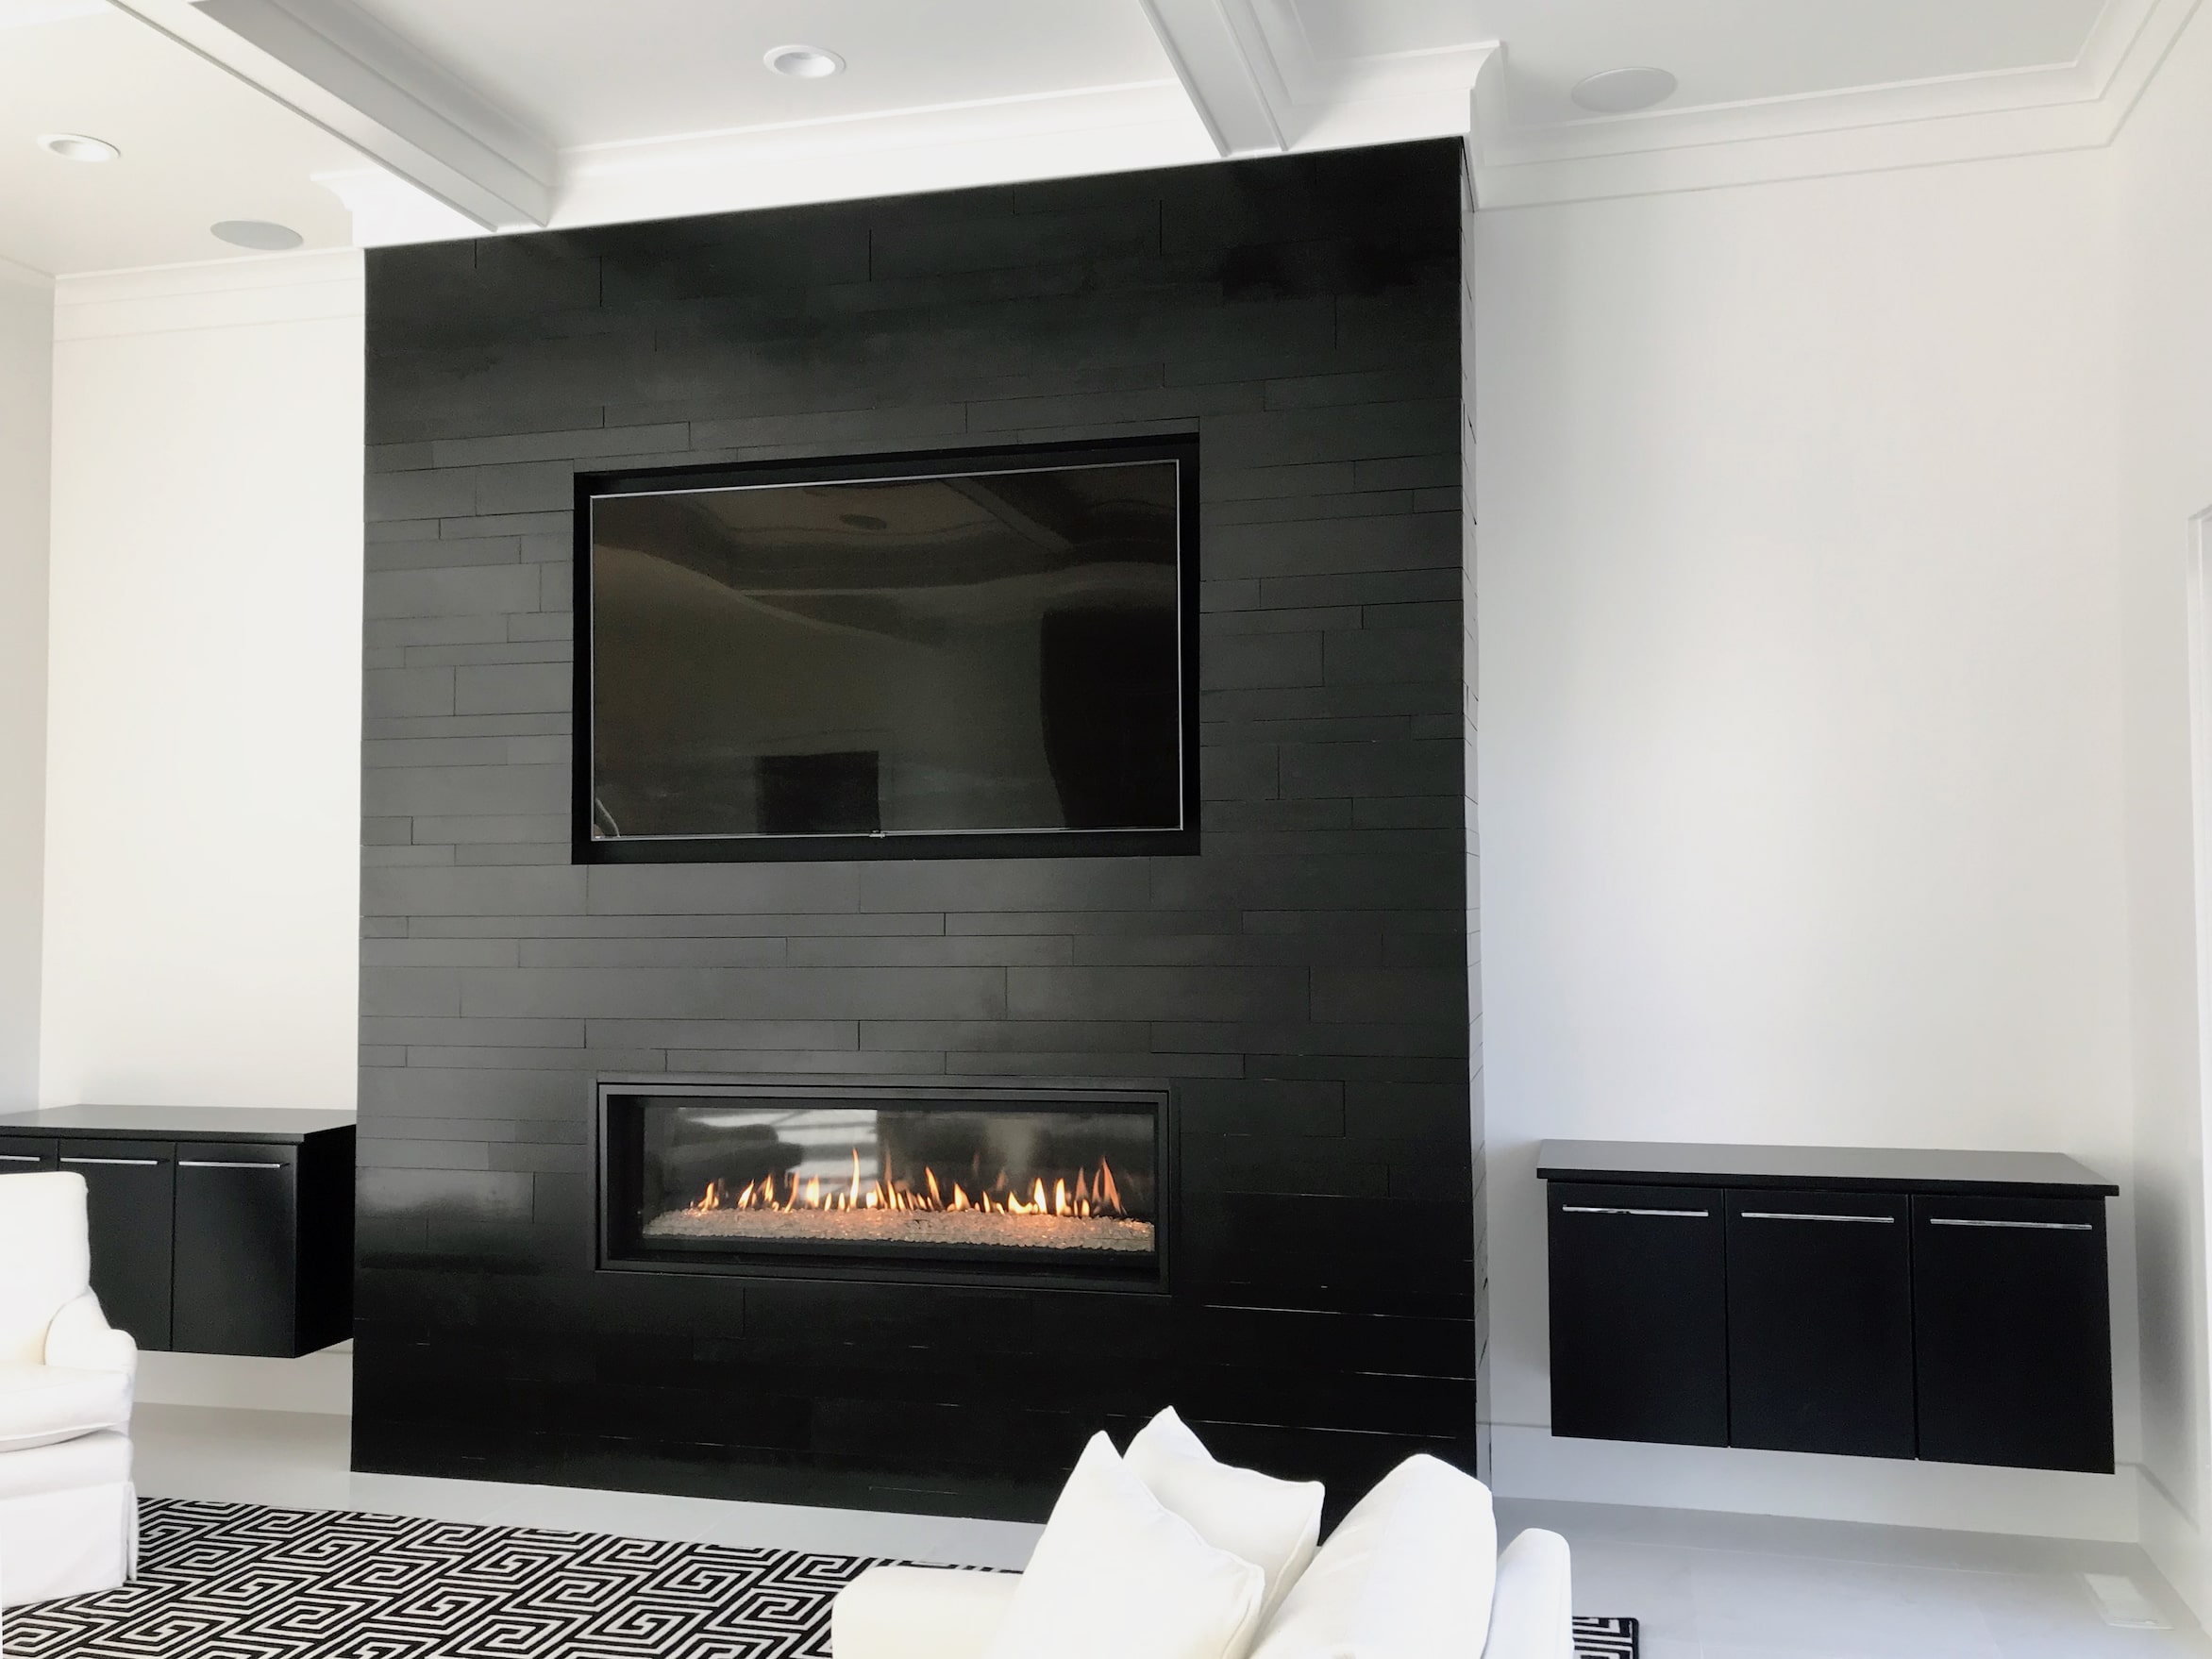 Norstone Planc Large Format Tiles in Ebony installed on a modern fireplace with linear gas insert and tv recess